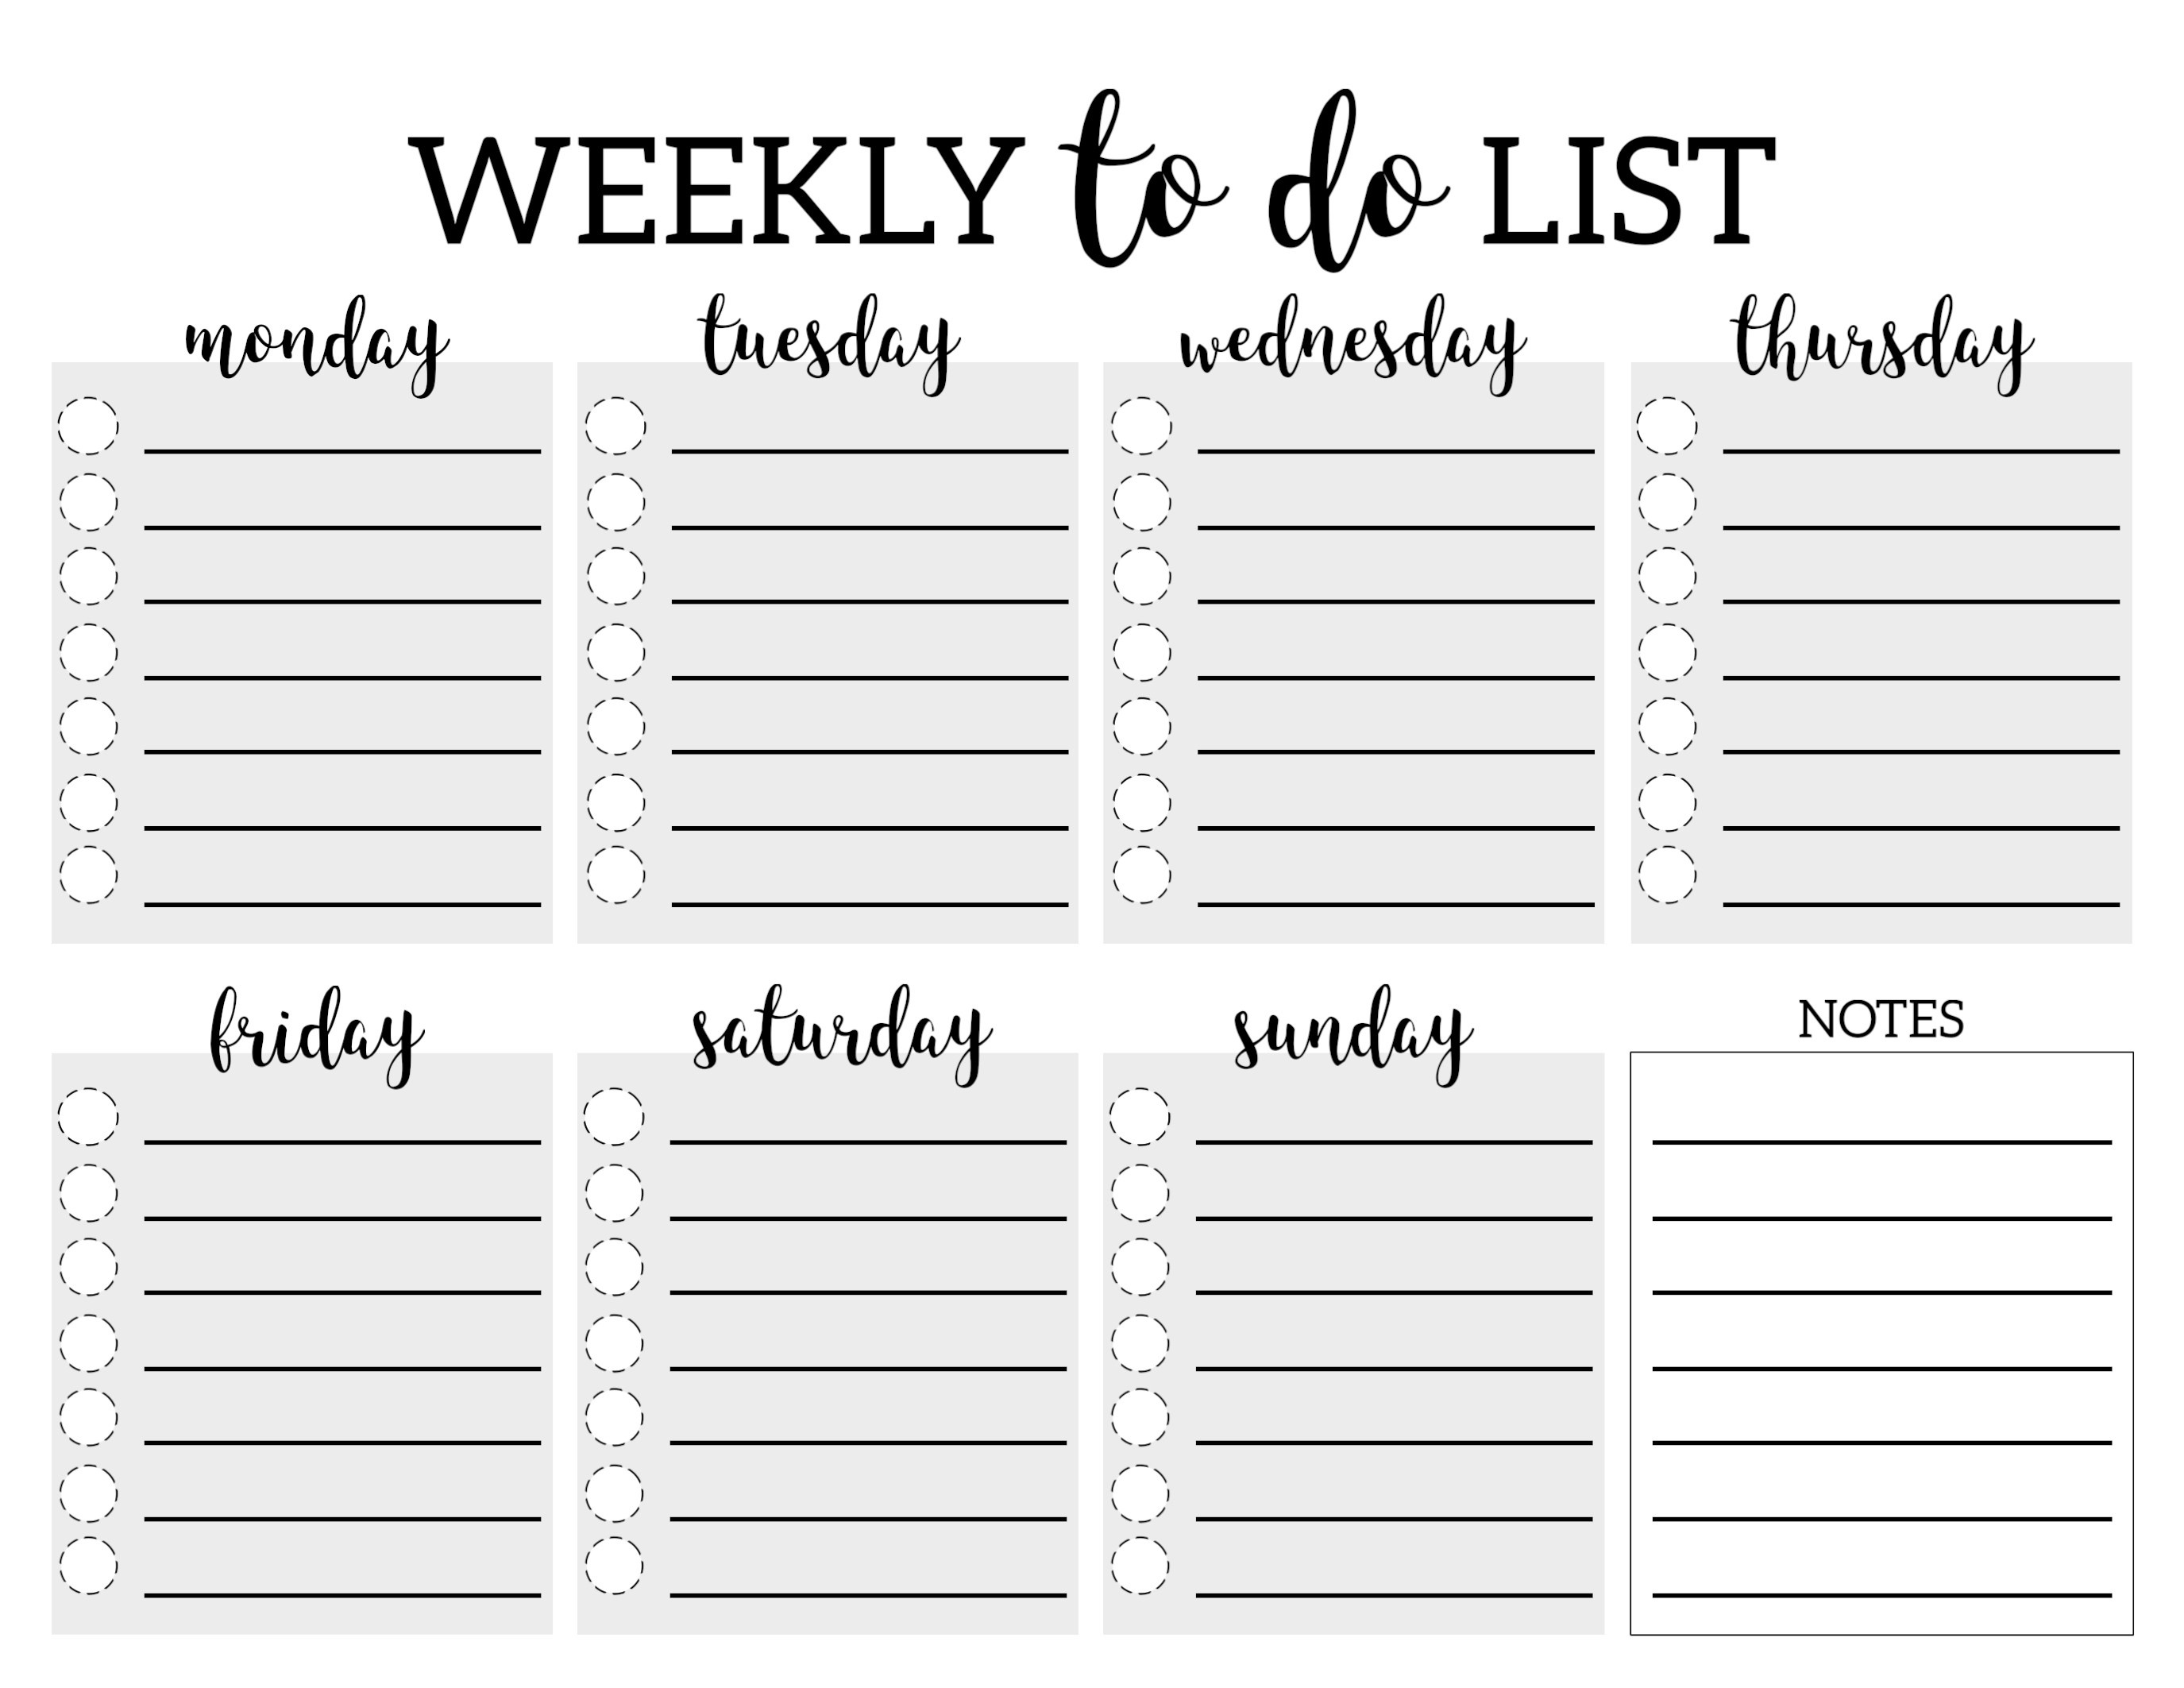 Weekly To Do List Printable Checklist Template - Paper Trail Design - Weekly To Do List Free Printable